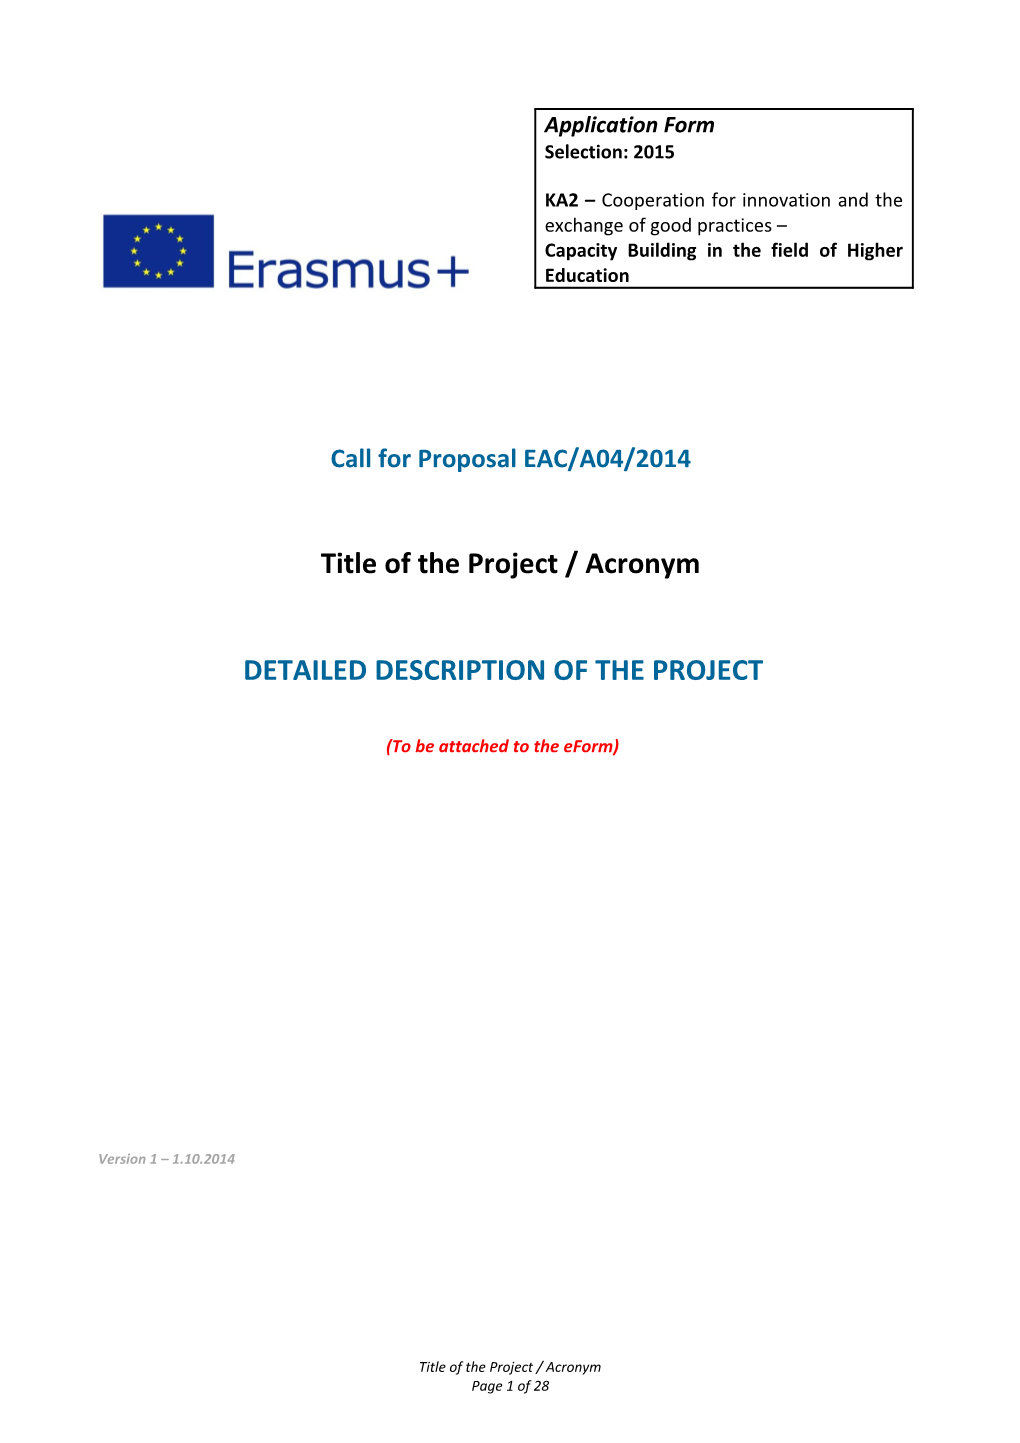 Call for Proposal EAC/A04/2014